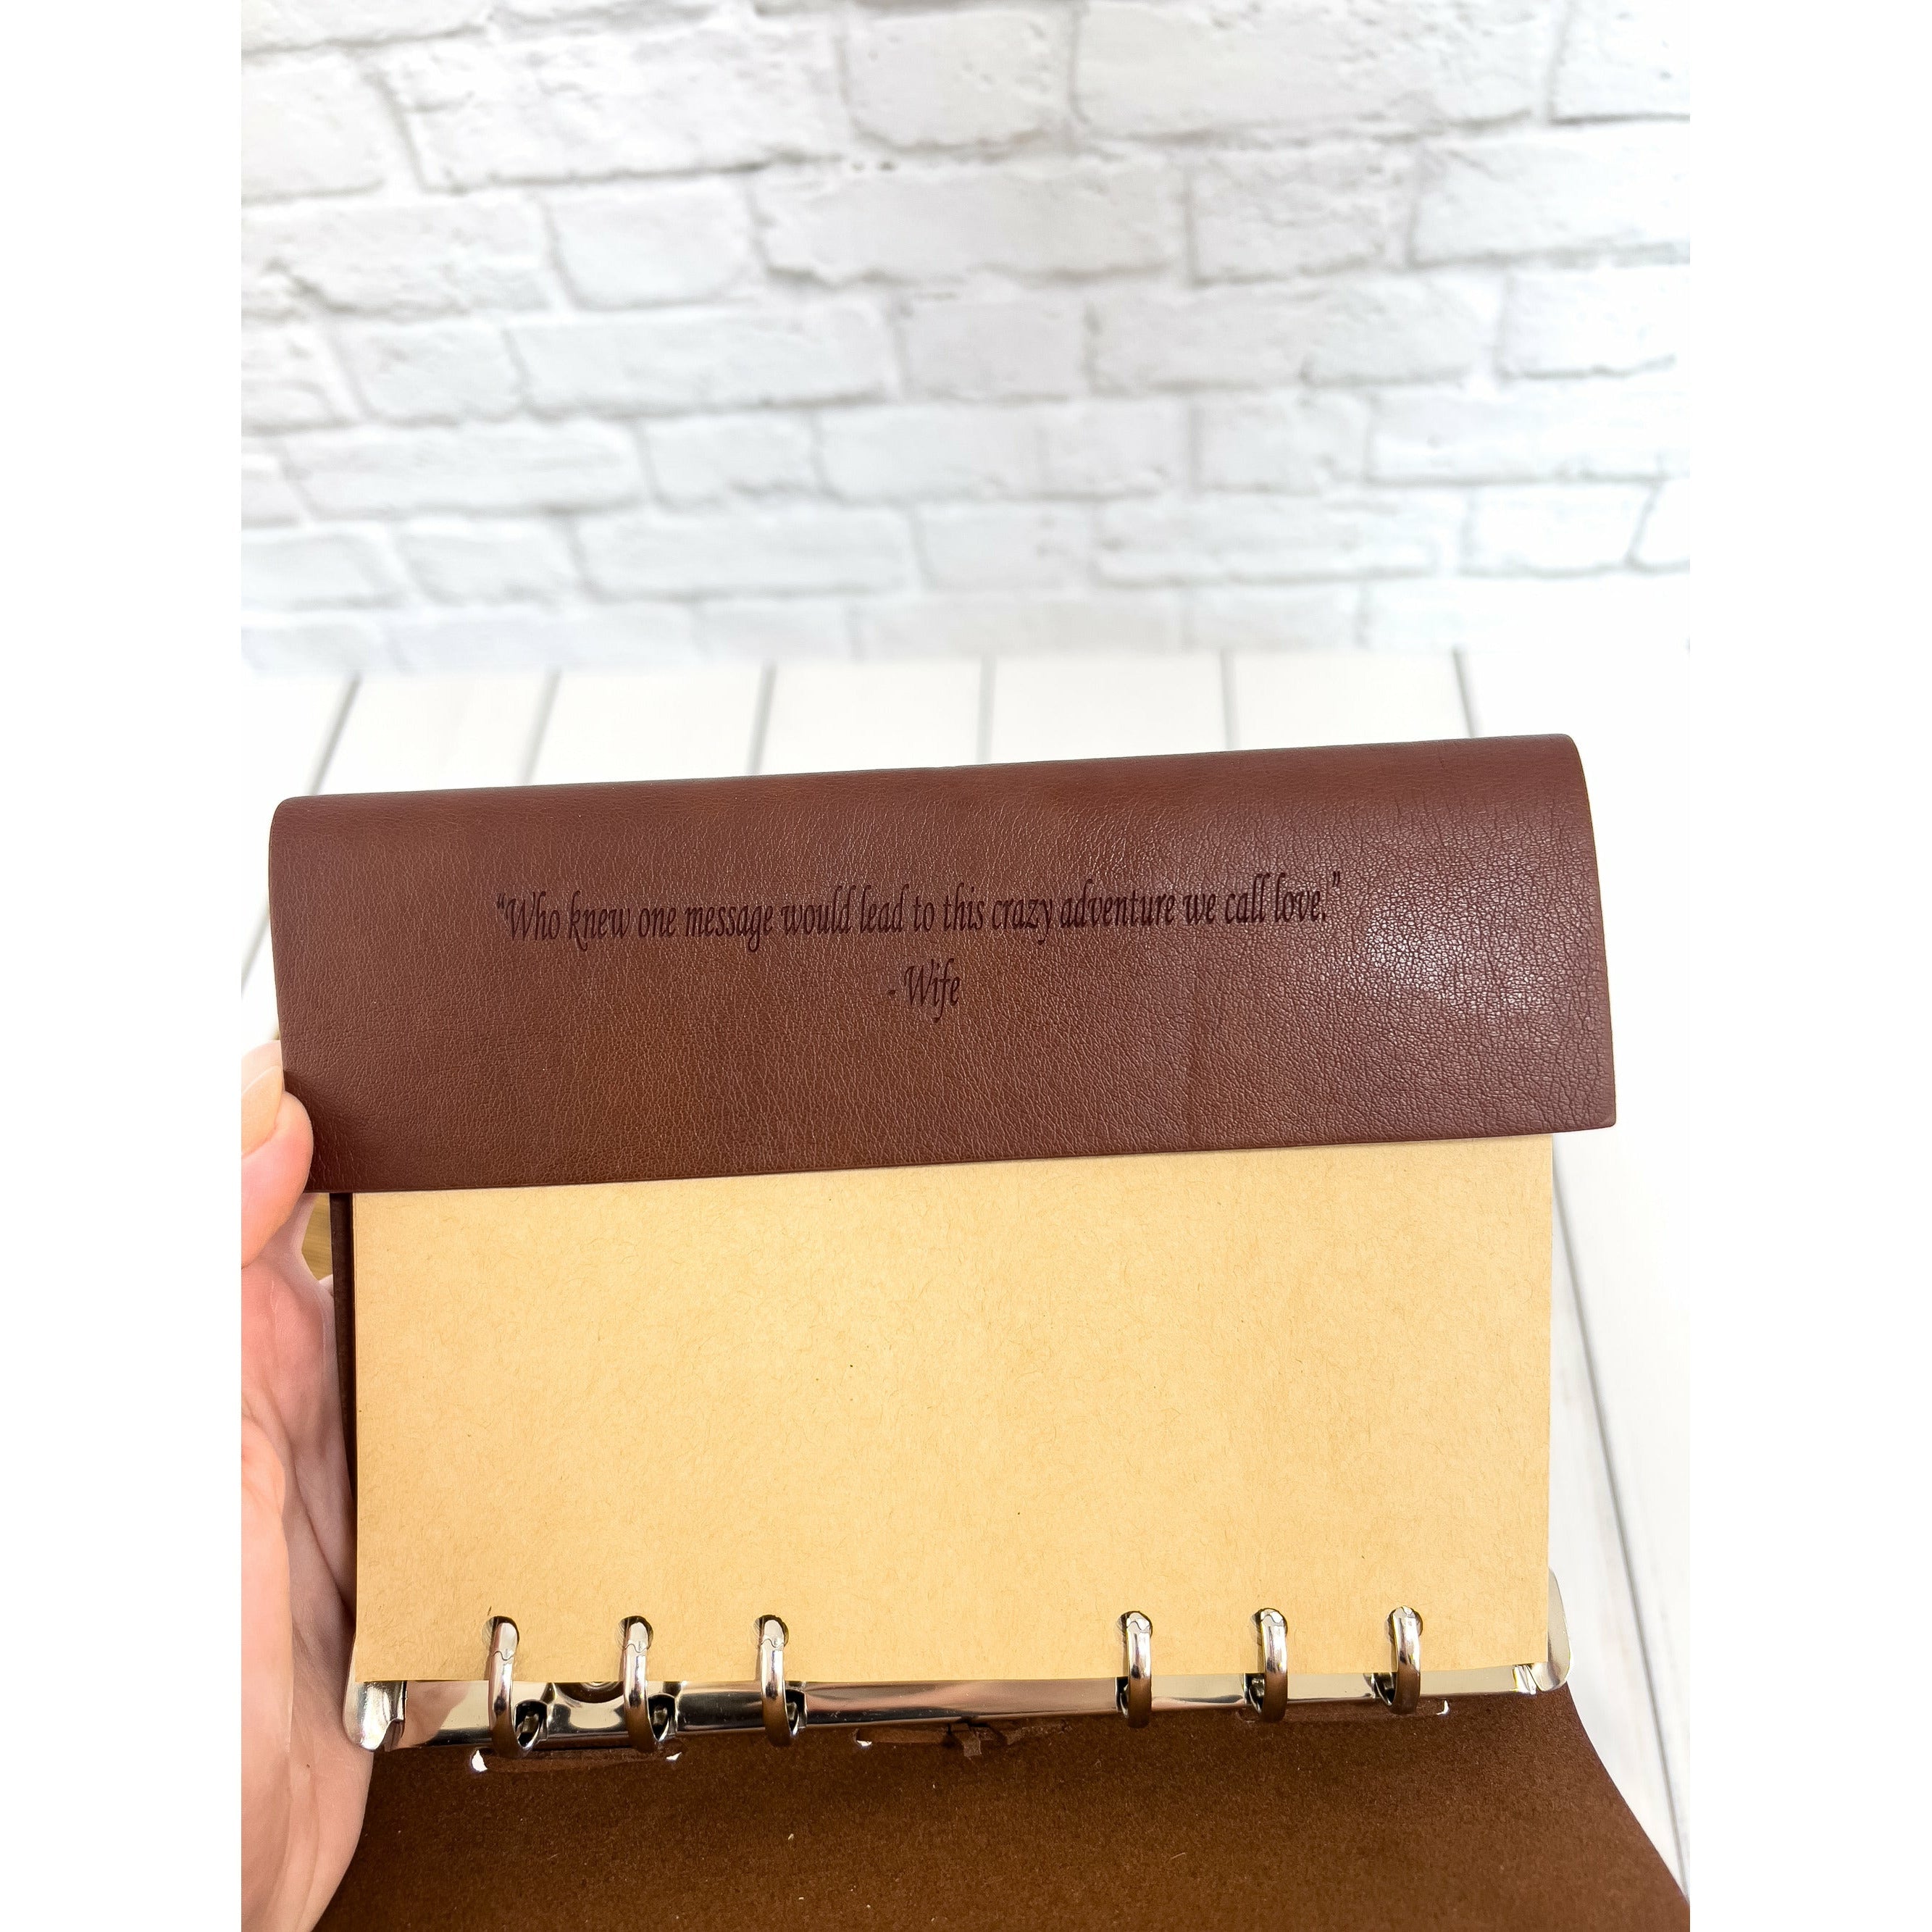 Personalized Journal Box With Journal